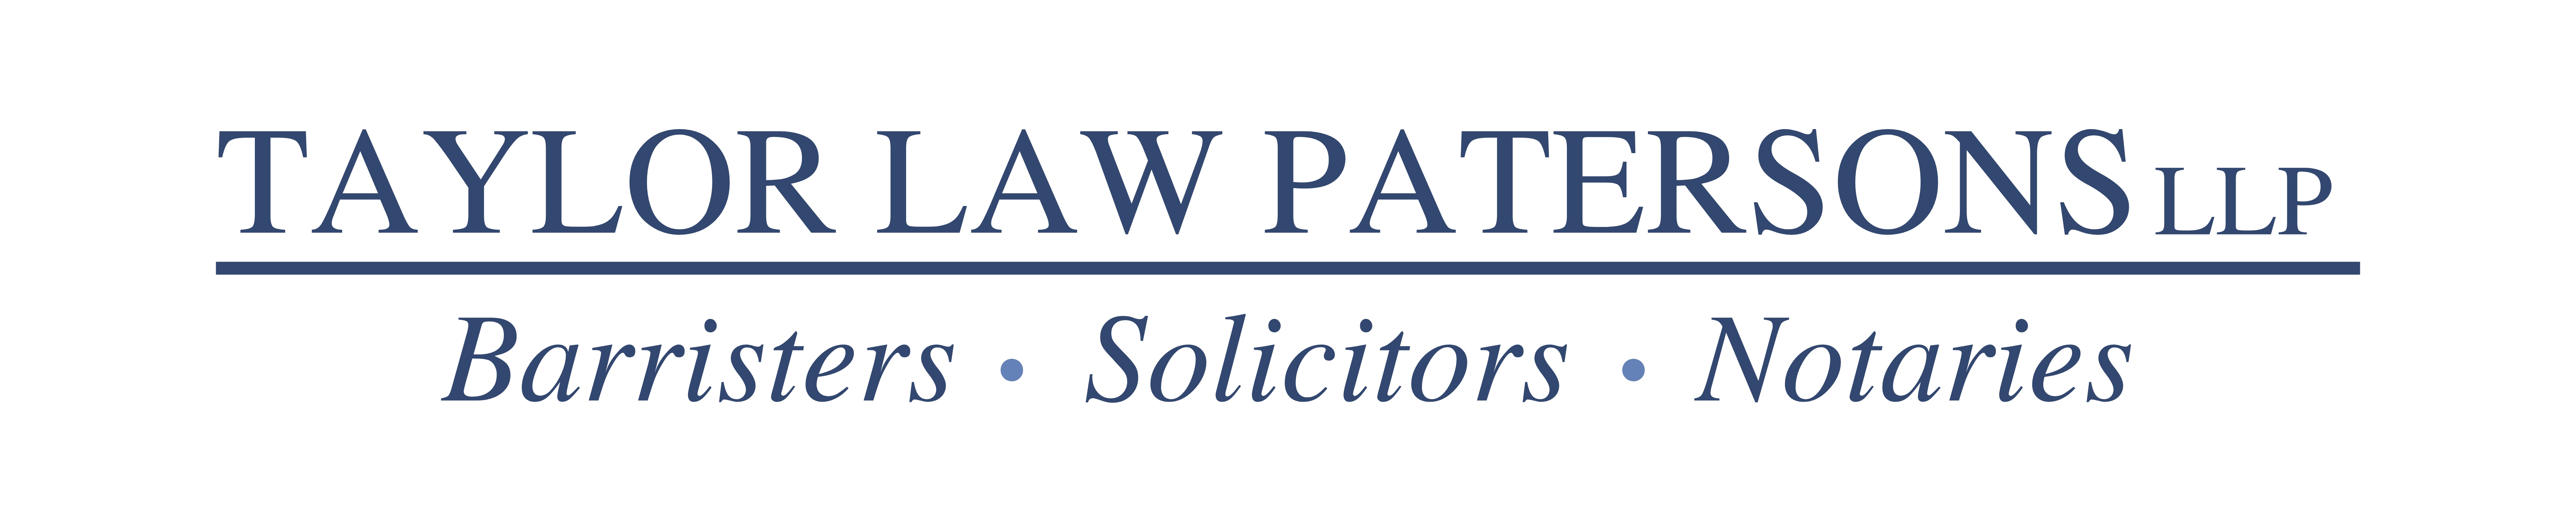 Taylor Law Patersons LLP